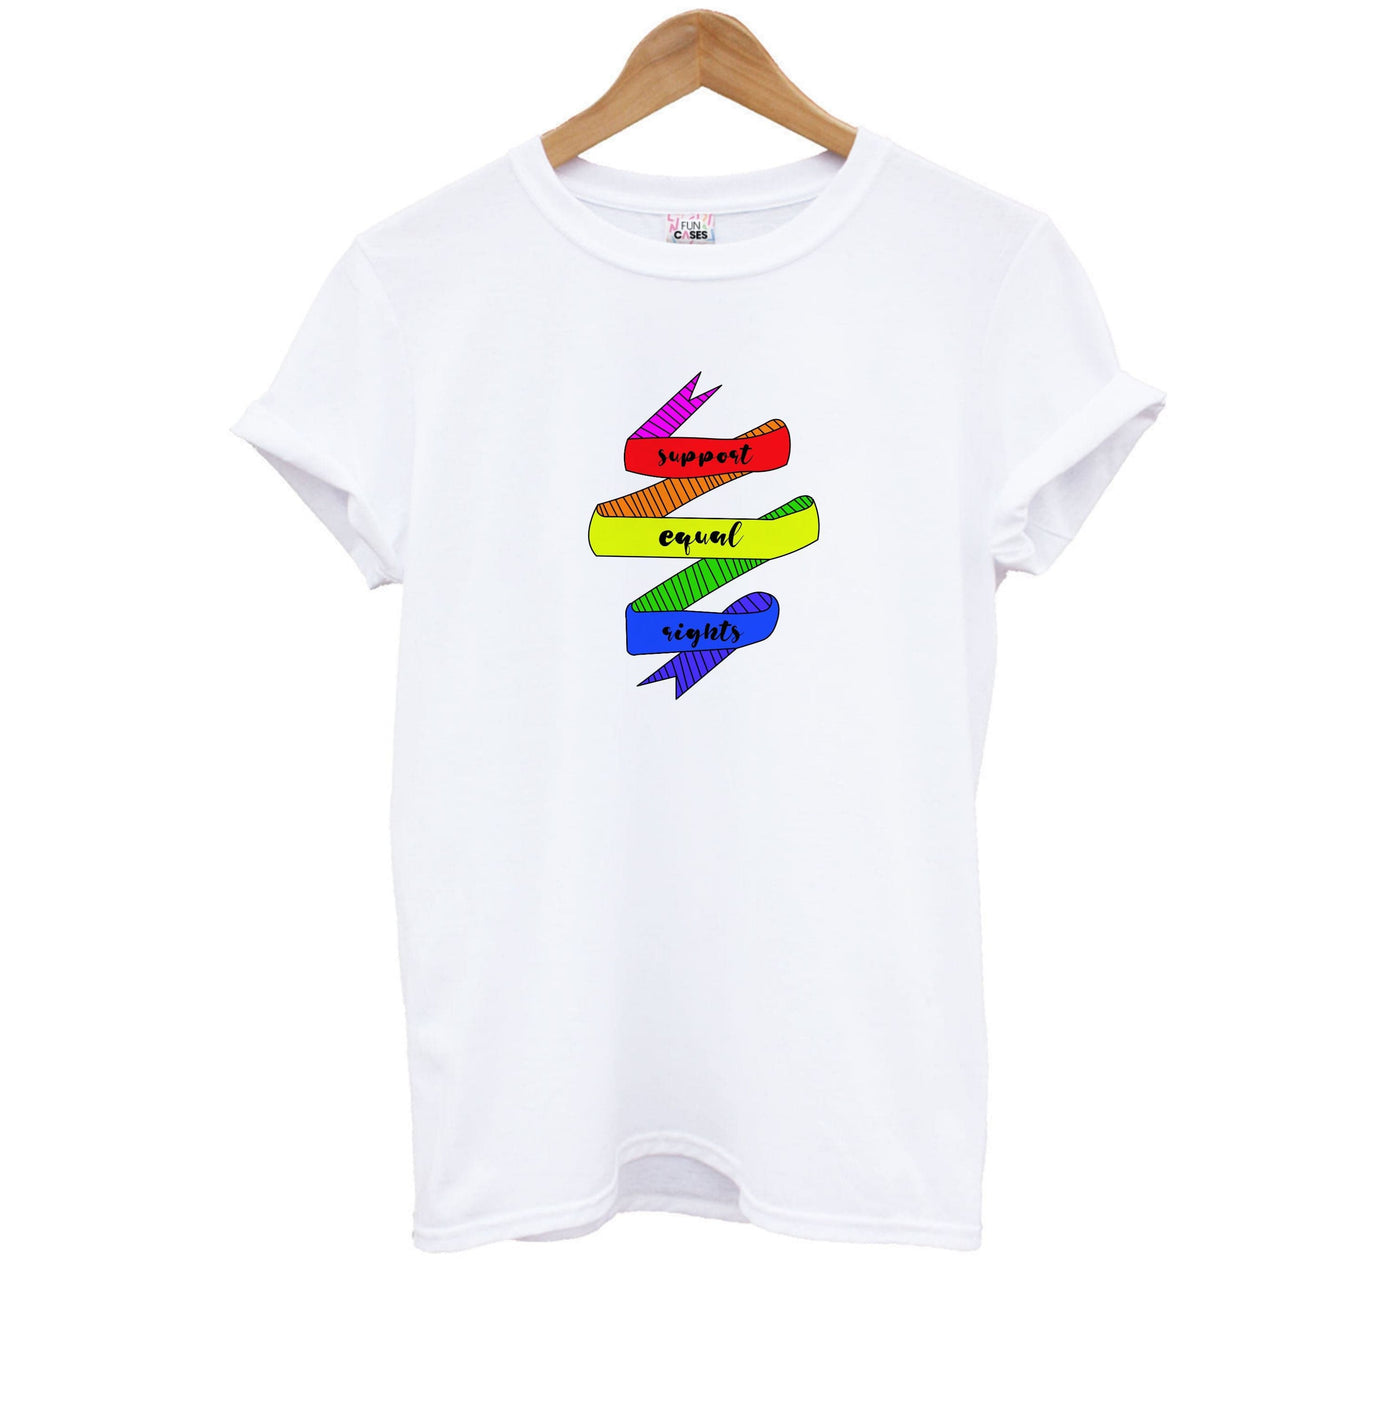 Support equal rights - Pride Kids T-Shirt